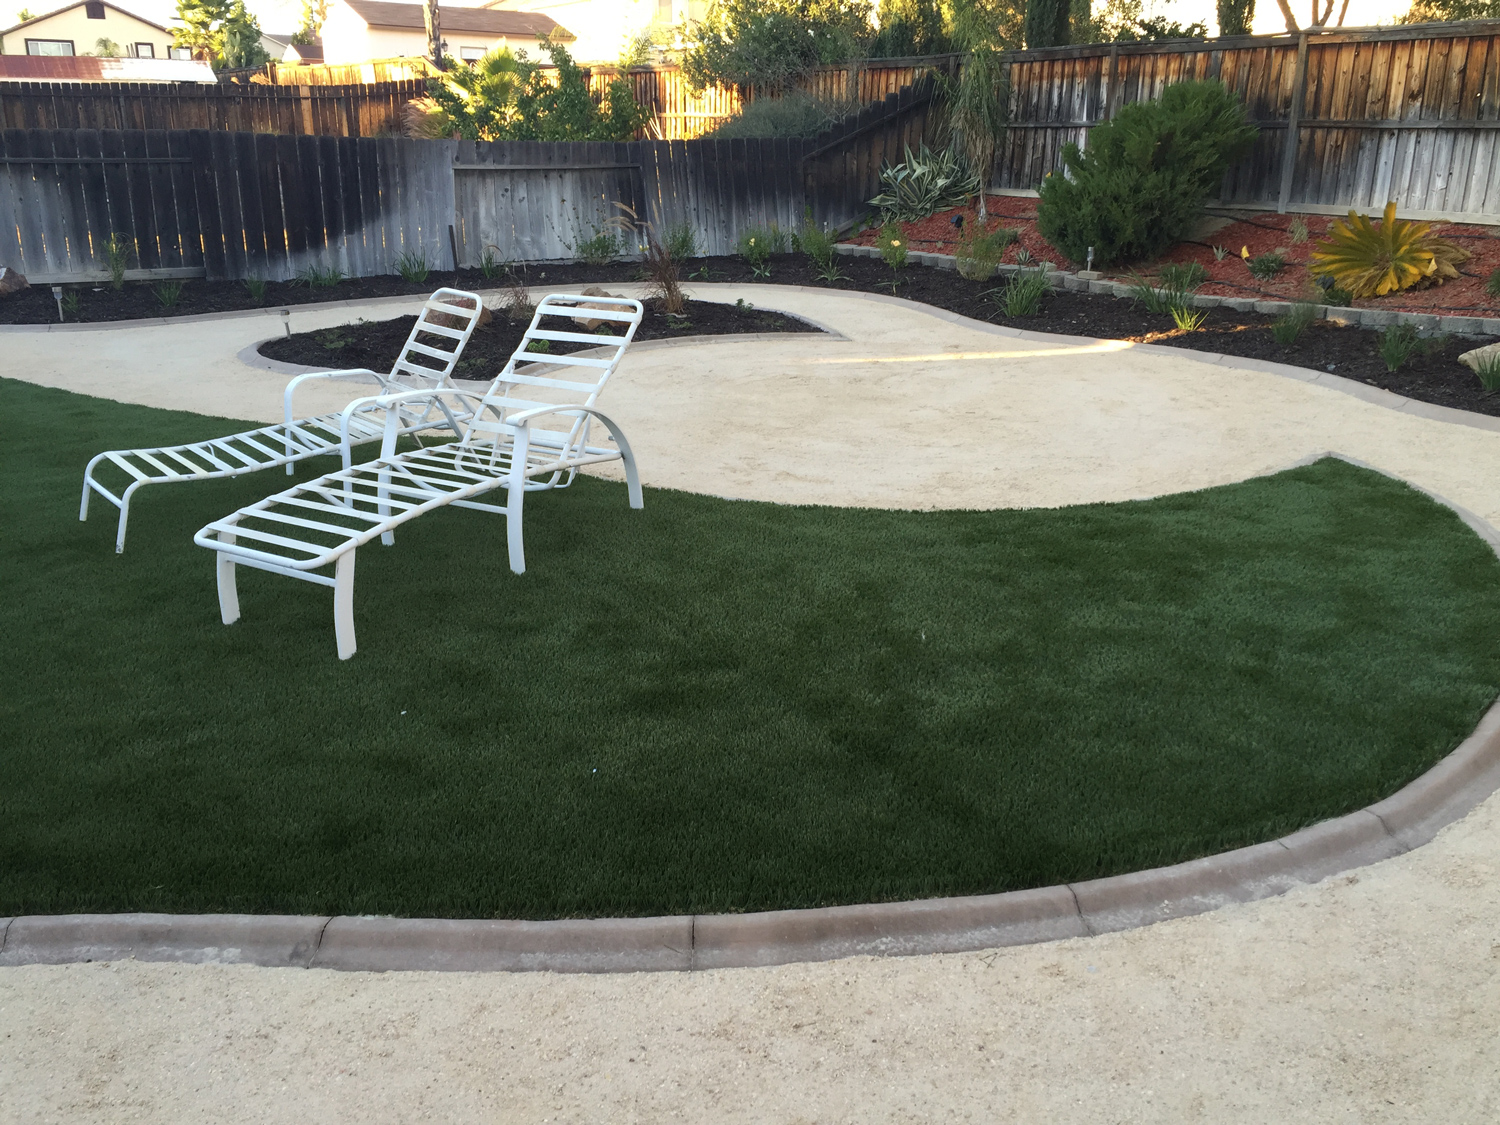 Backyard landscaping with white lawn chairs, lush dark green grass and mulch beds with plants.